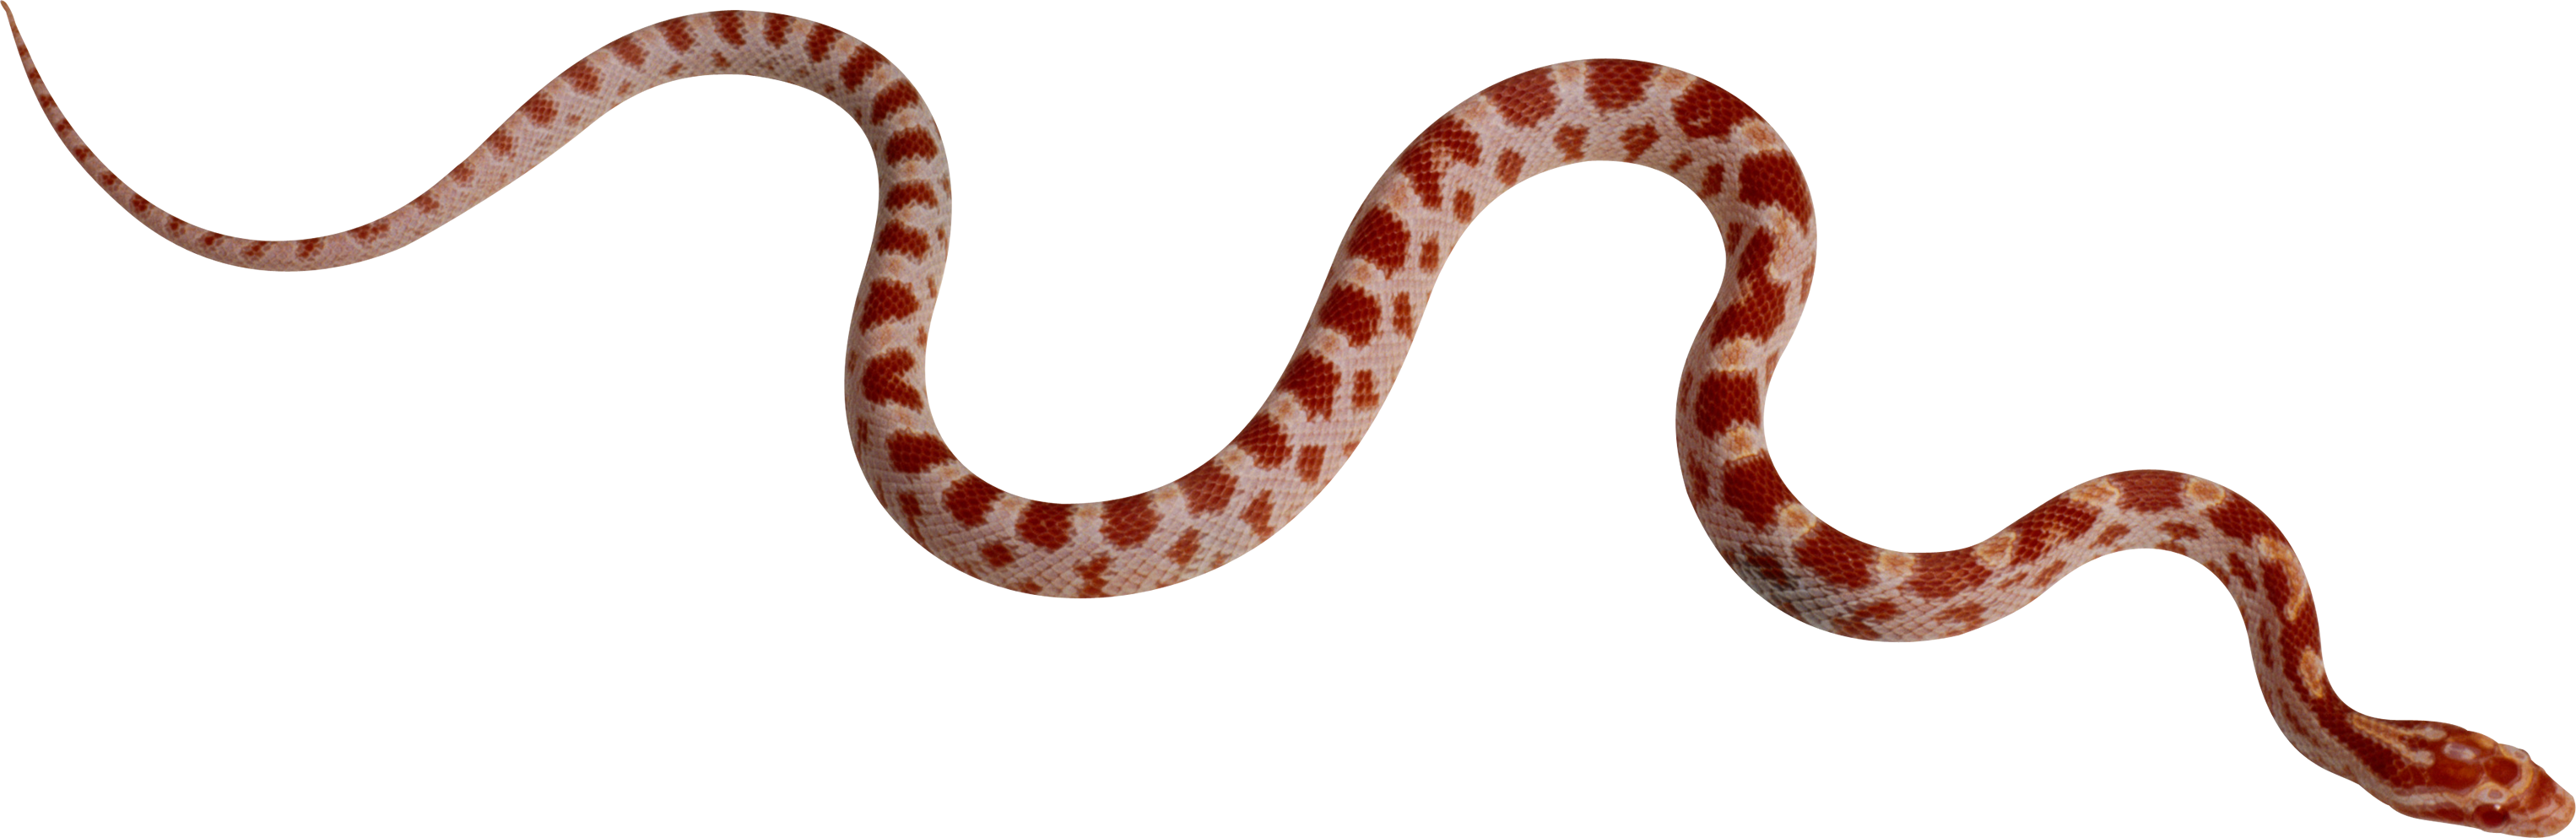 Snake PNG image picture download free transparent image download, size:  3052x993px